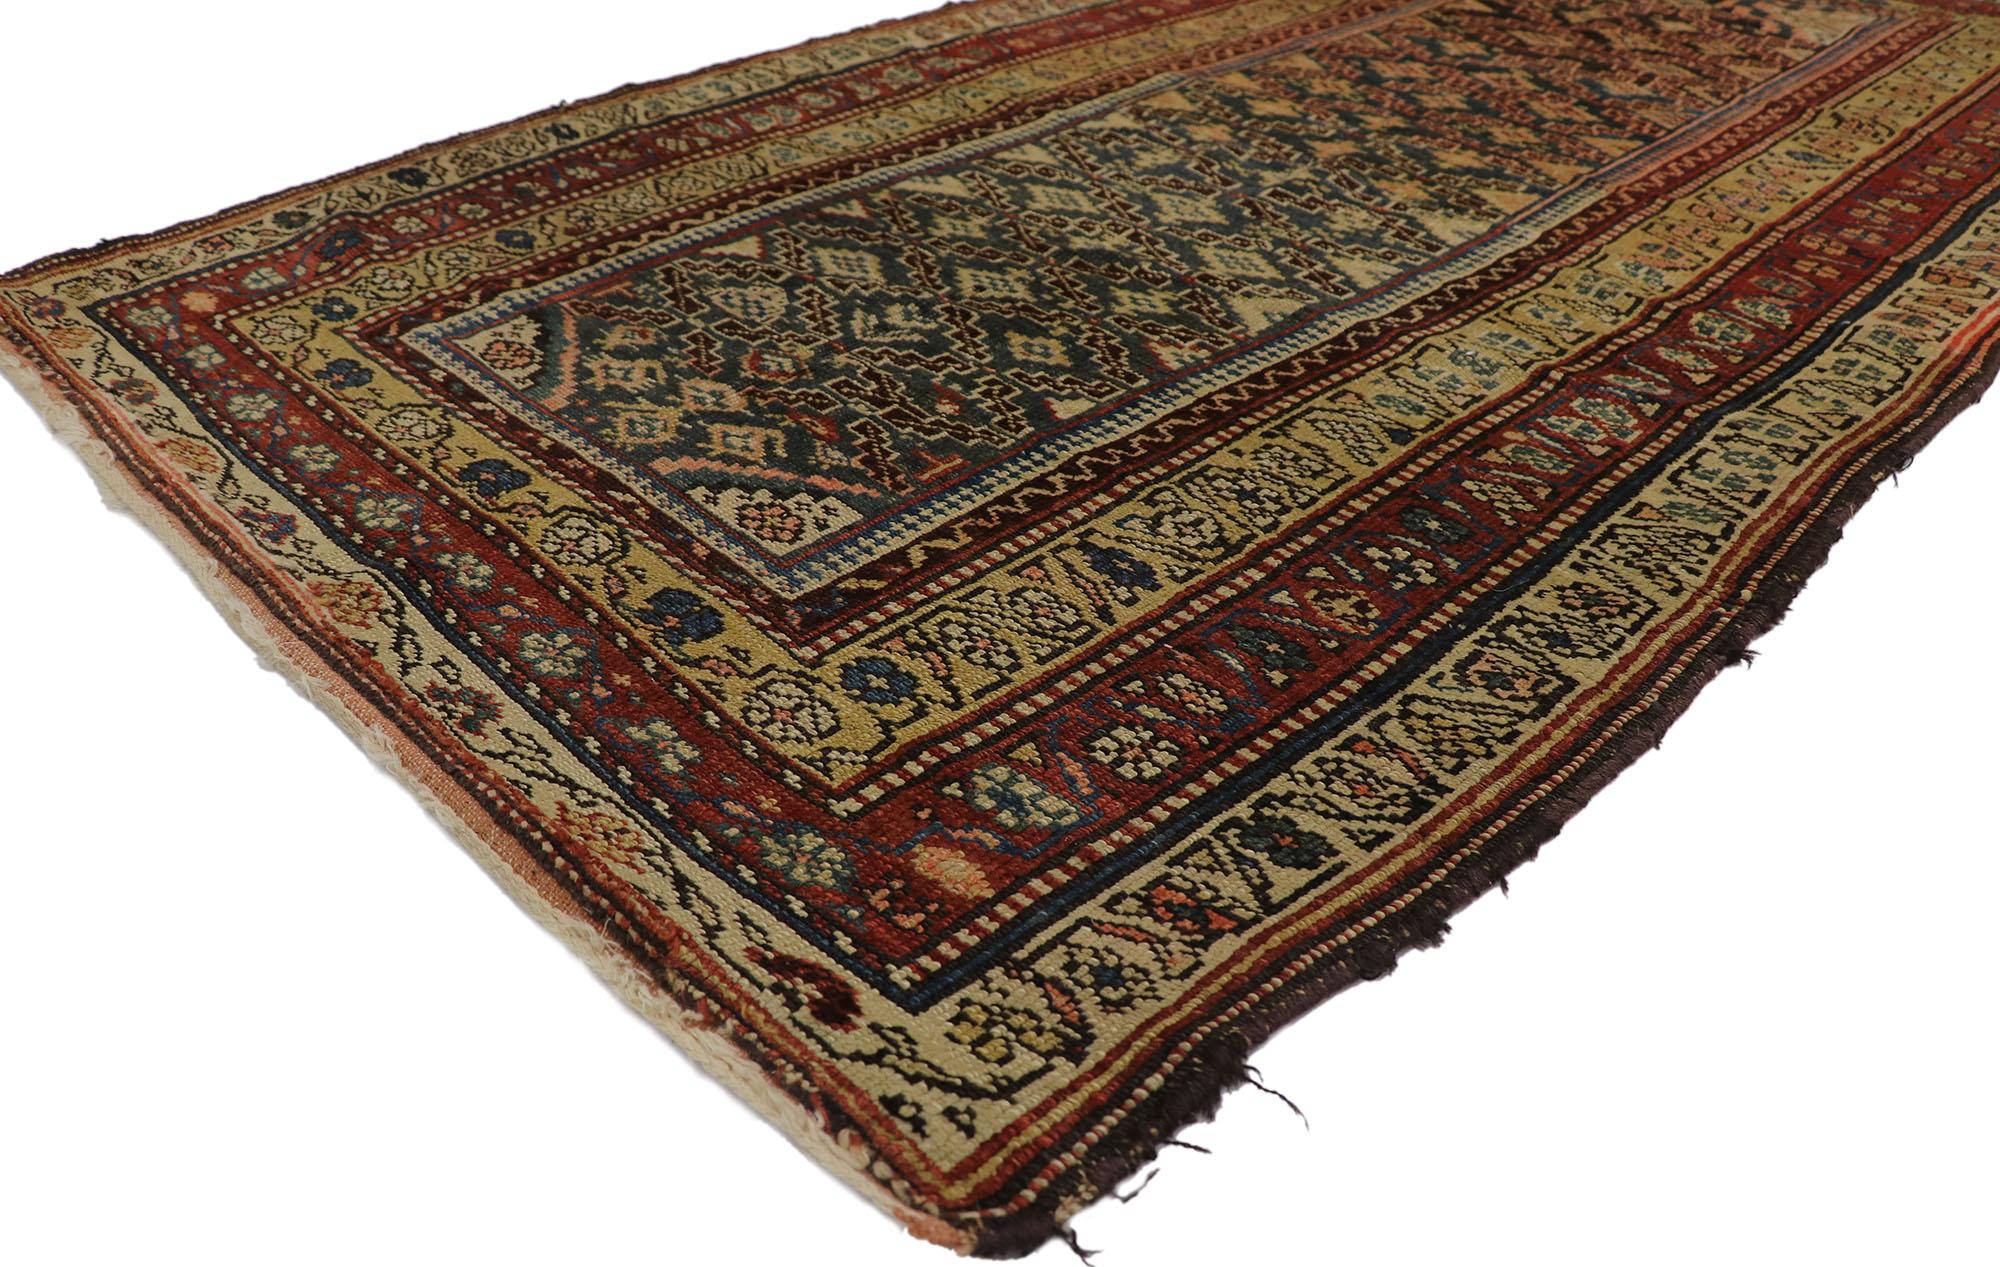 21691 antique Caucasian Shirvan rug with Tribal style 04'04 x 07'07. Give the look of woven wonders and nomadic charm with this hand-knotted wool antique Caucasian Shirvan rug. The abrashed navy blue field features an all-over geometric lozenge